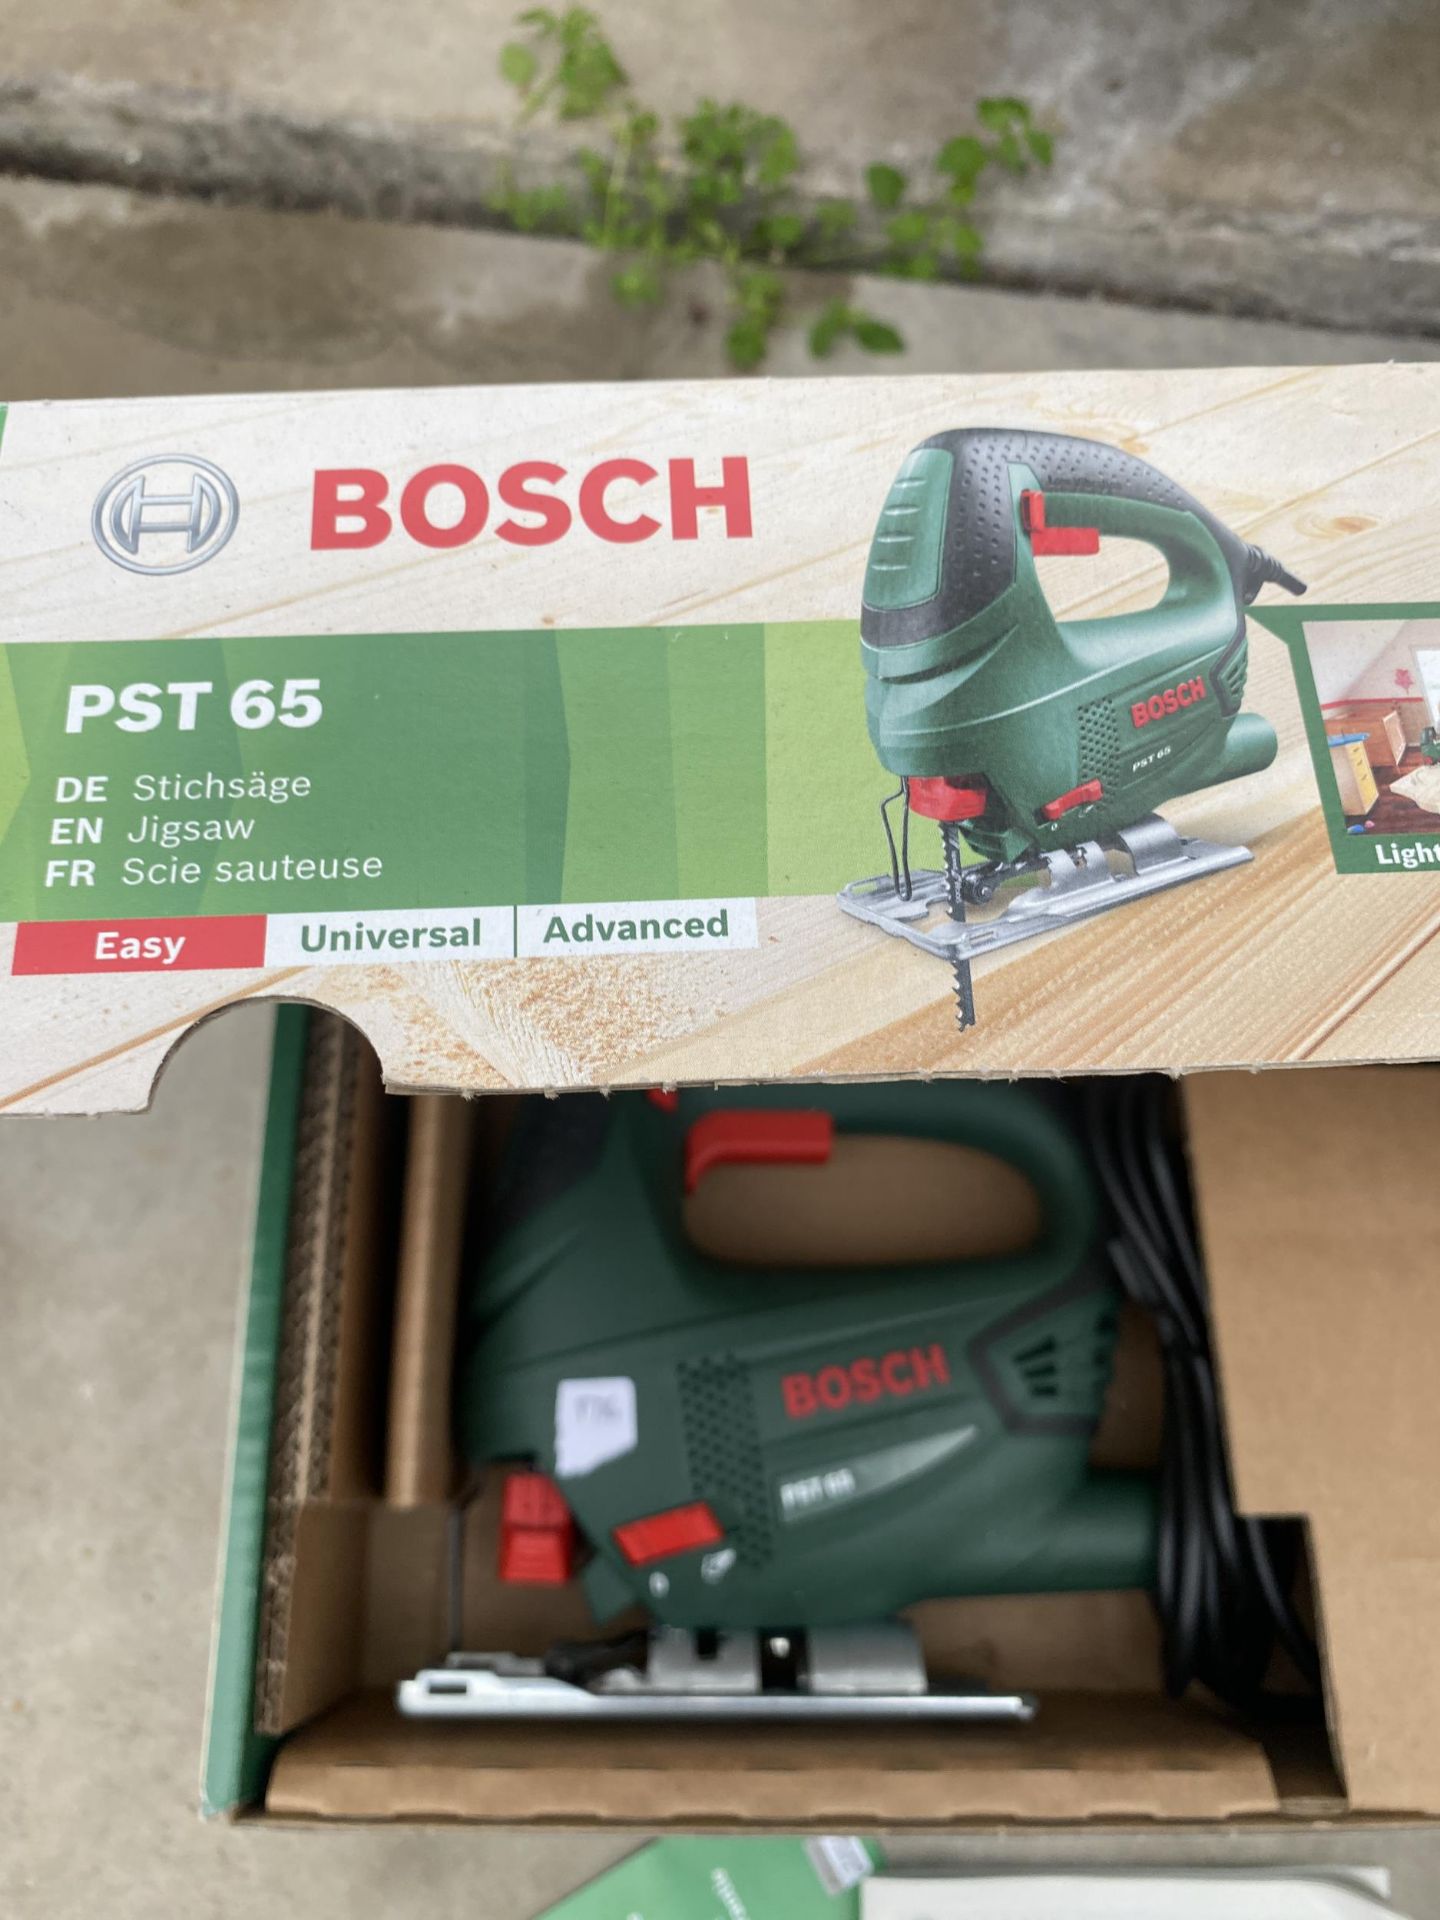 A NEW AND BOXED BOSCH PST65 ELECTRIC JIGSAW - Image 2 of 2